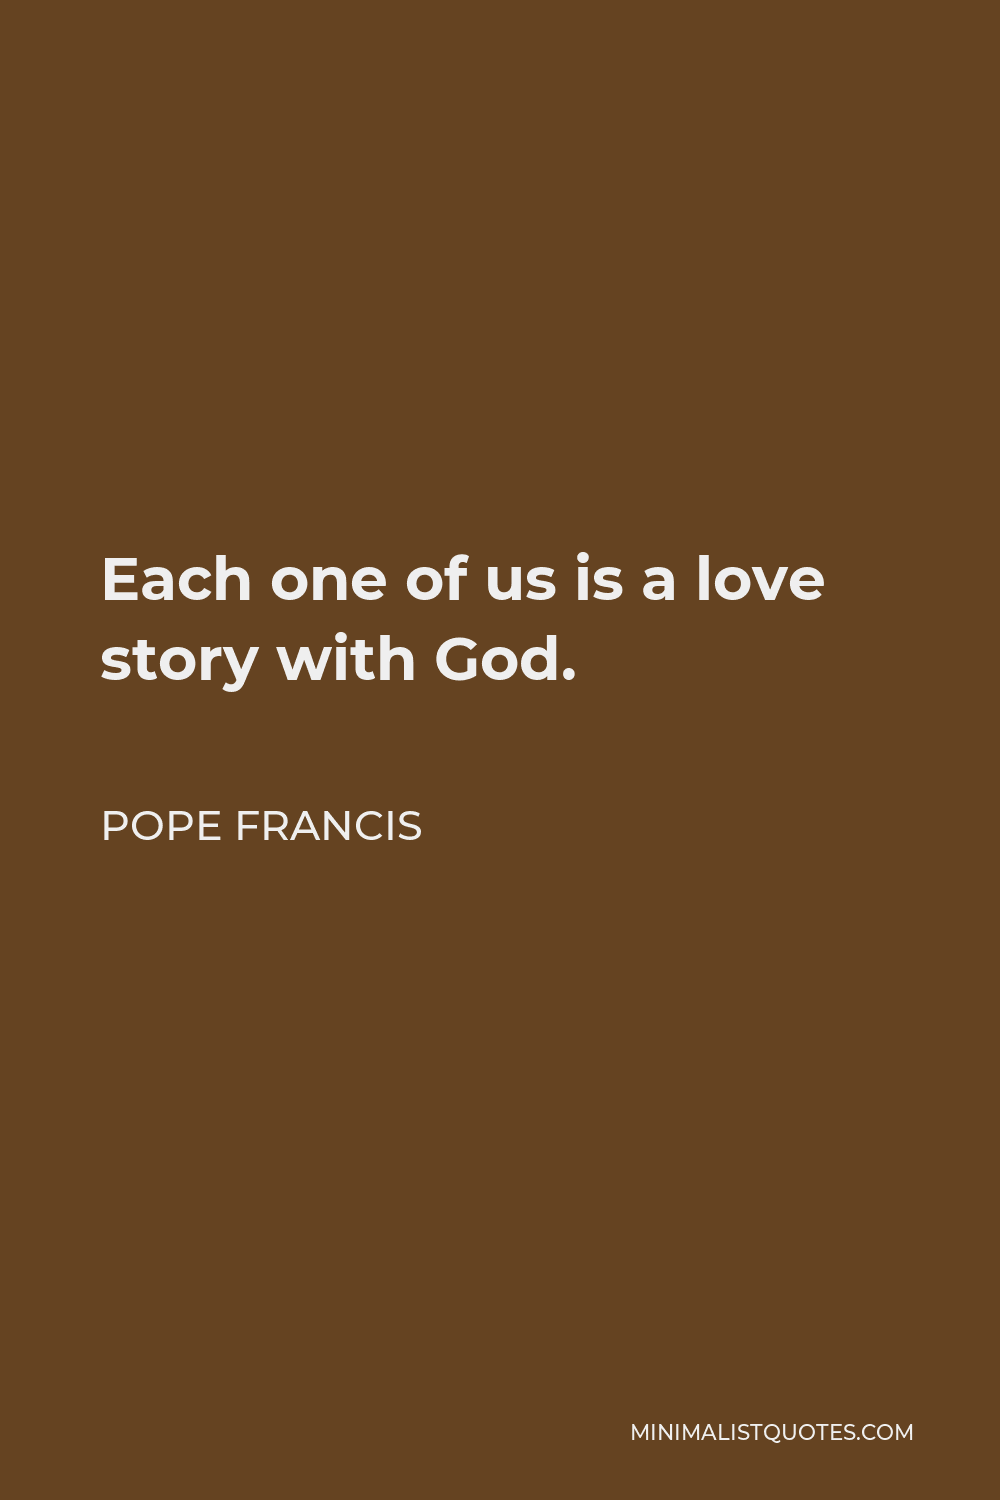 Pope Francis Quote - Each one of us is a love story with God.